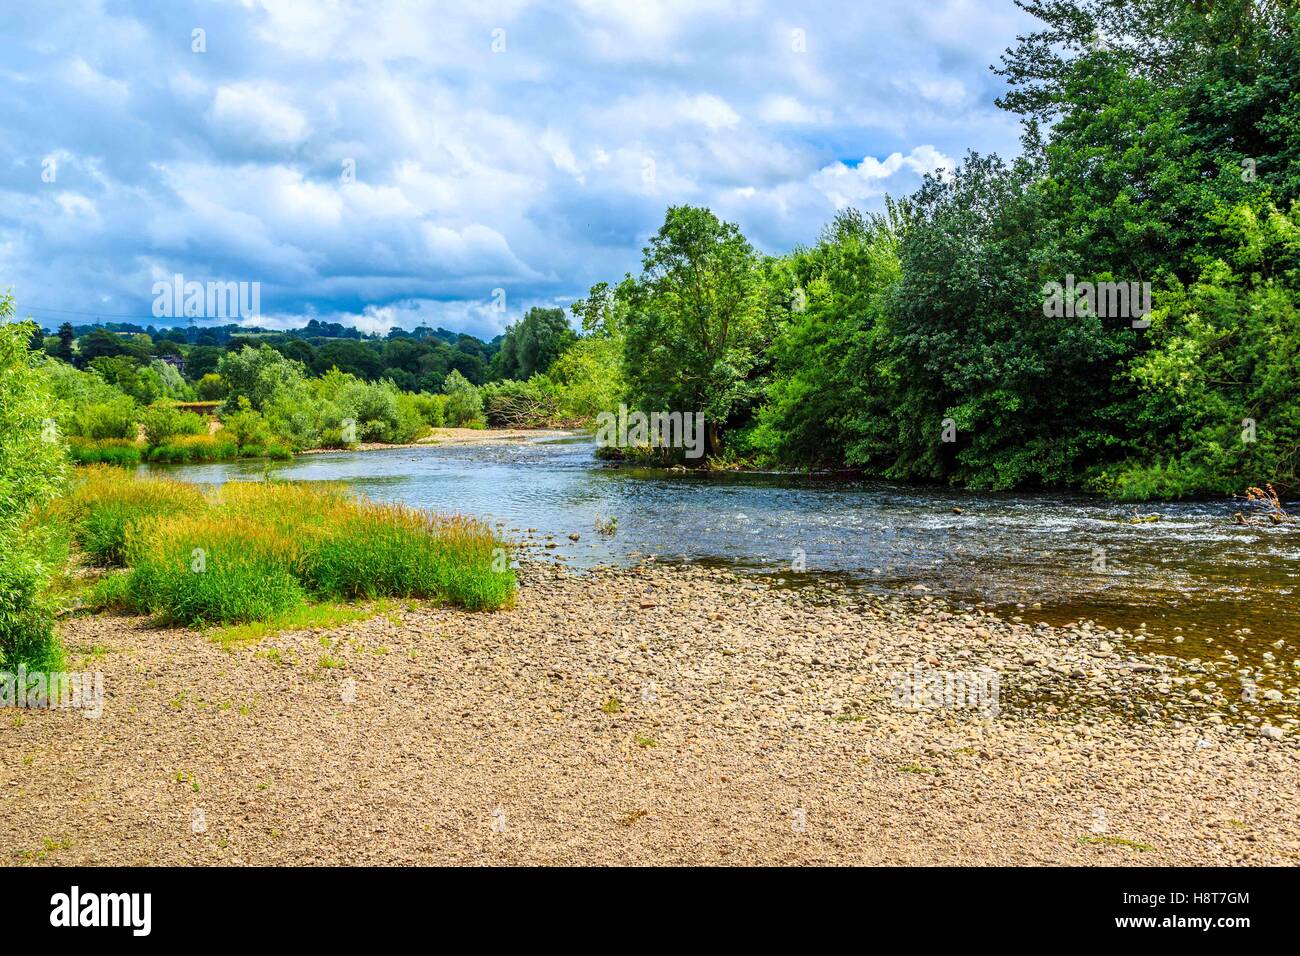 A lovely river in Shropshire, England Stock Photo